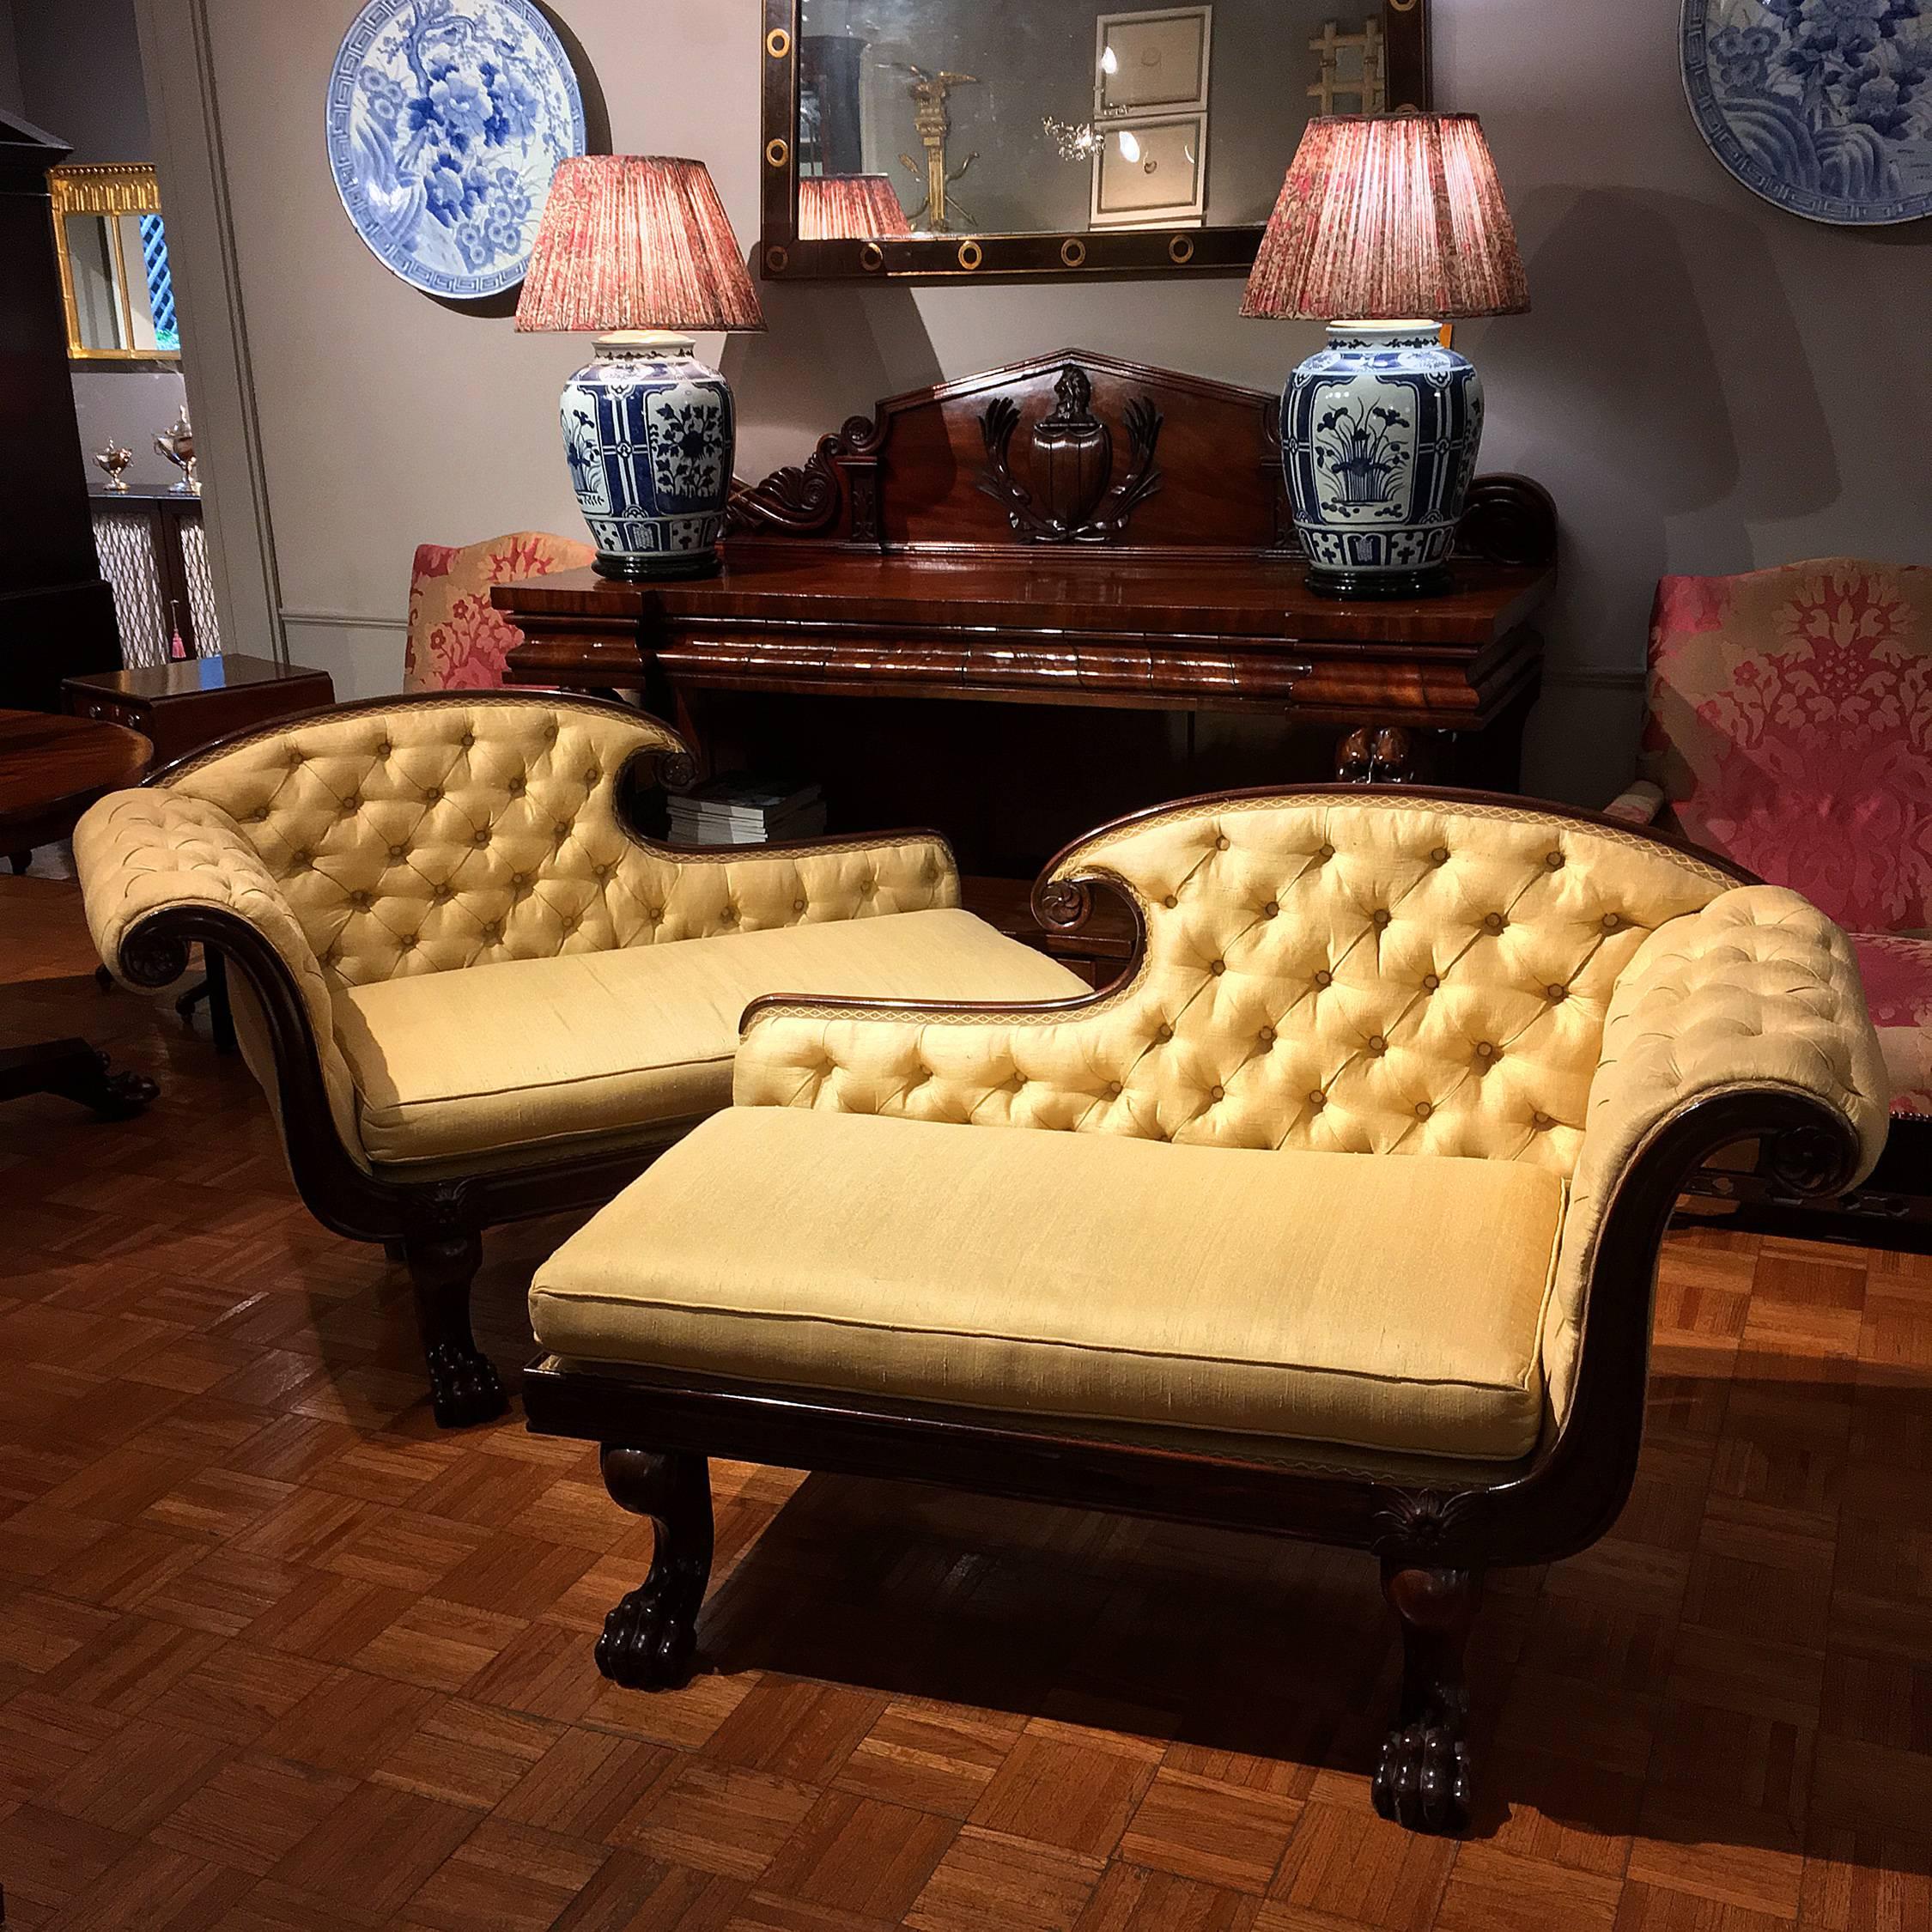 This pair of early 19th-century William IV chaises longues or chaise lounges is distinguished by their unusually small size. They are ornamented with carved rosettes, and with lion's paw feet in the front and turned legs in the back. Each with